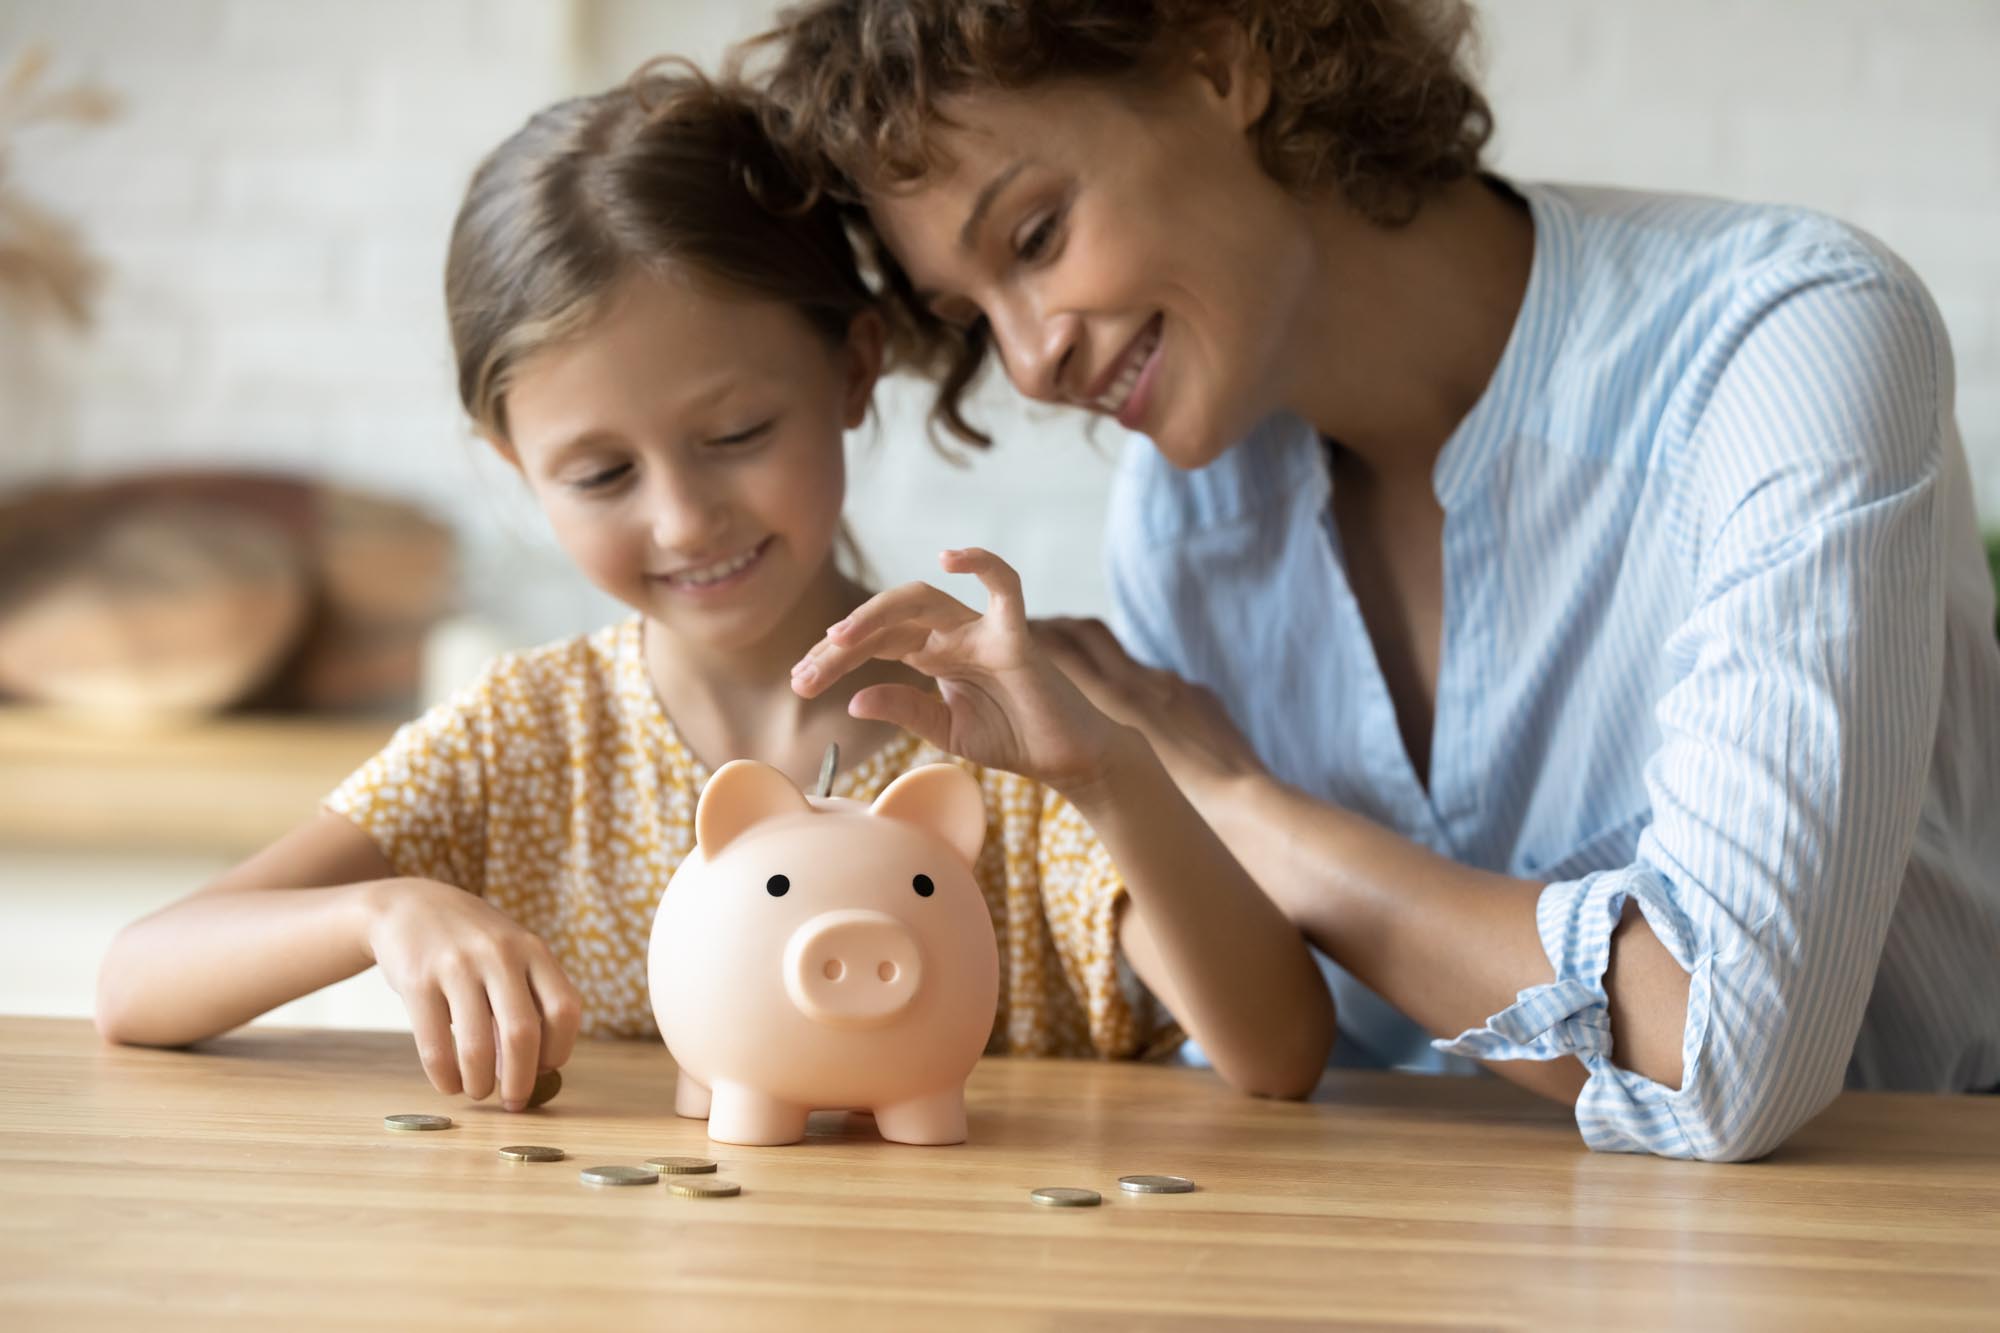 saving money with your children is the best way to provide them with financial knowledge